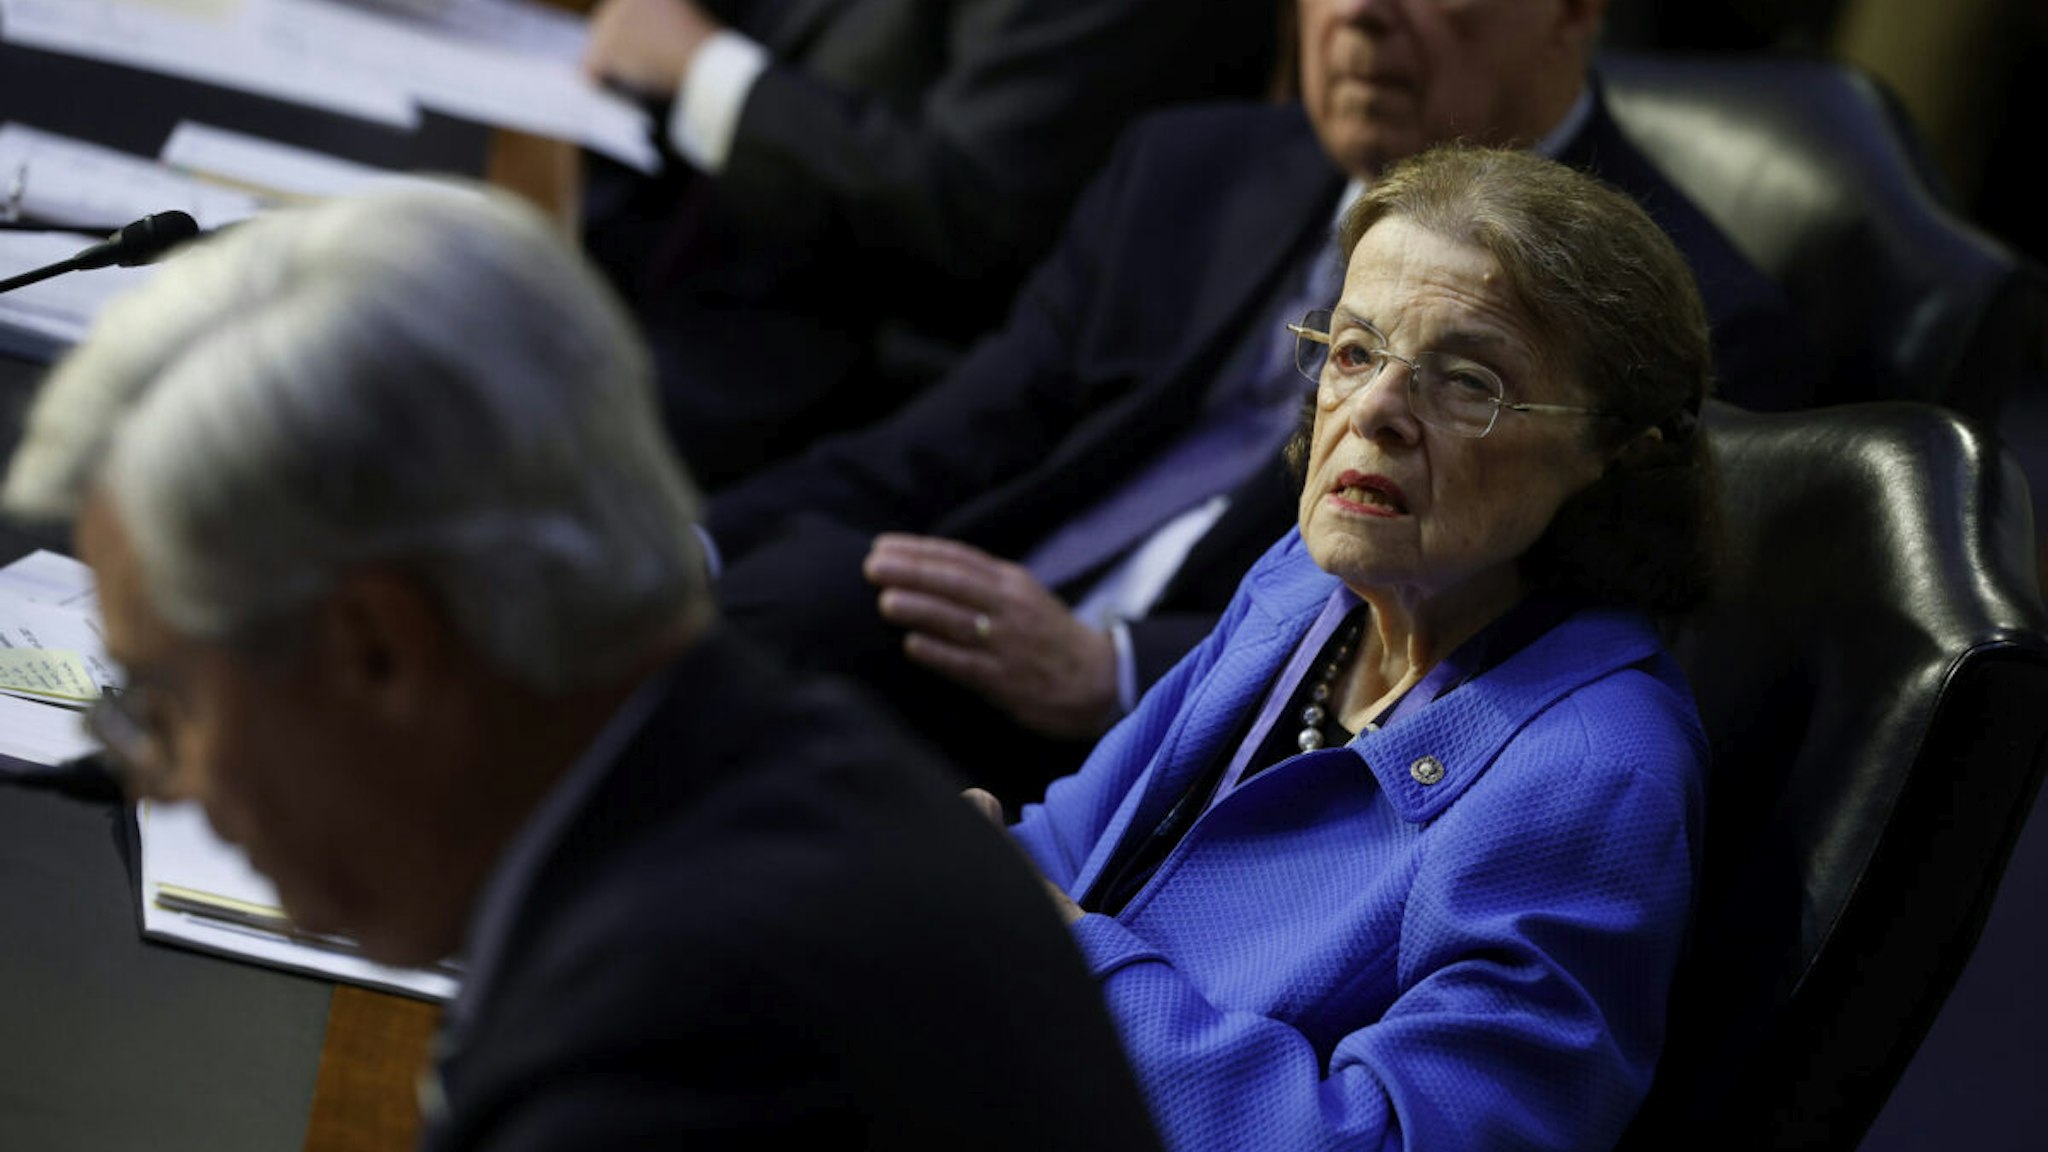 Senate Judiciary Committee member Sen. Dianne Feinstein (D-CA) (C) and Chairman Richard Durbin (D-IL) listen to debate during a committee business meeting about Supreme Court ethics reform in the Hart Senate Office Building on Capitol Hill on July 20, 2023 in Washington, DC.